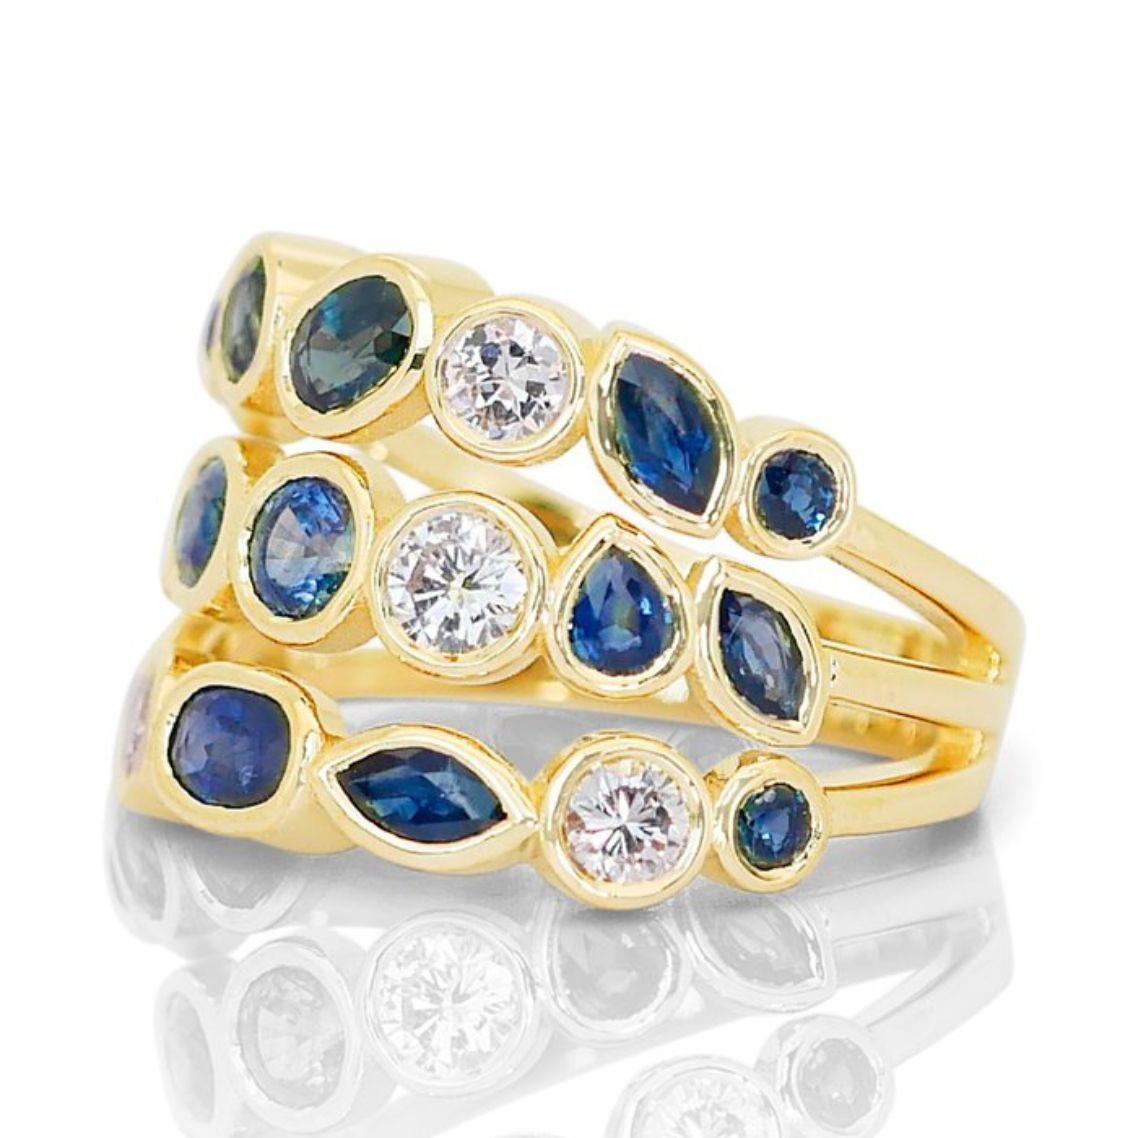 Surrounding the diamonds is a stunning array of sapphires, showcasing a captivating blend of cuts and colors. Five round sapphires, totaling 0.95 carats, add a touch of classic elegance with their deep blue brilliance. Four marquise-cut sapphires,